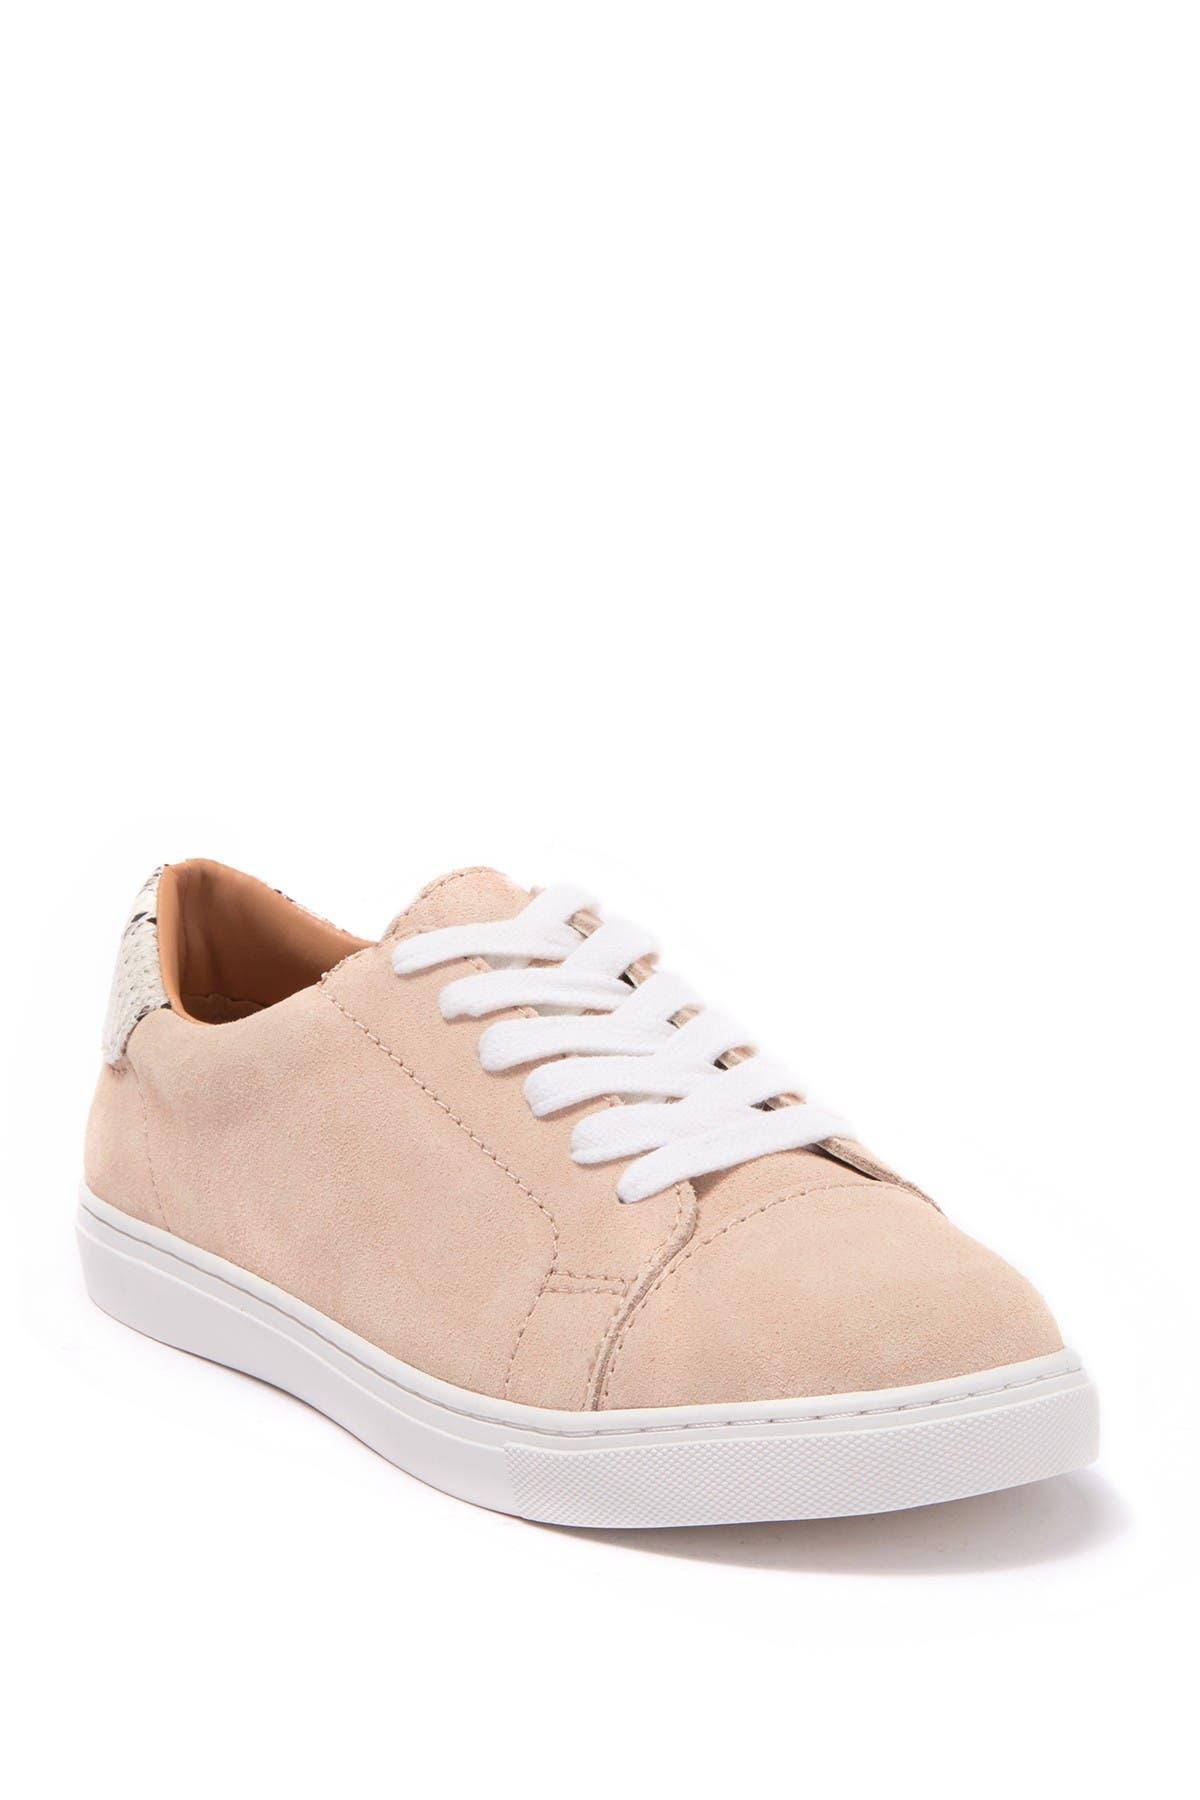 nordstrom leather sneakers